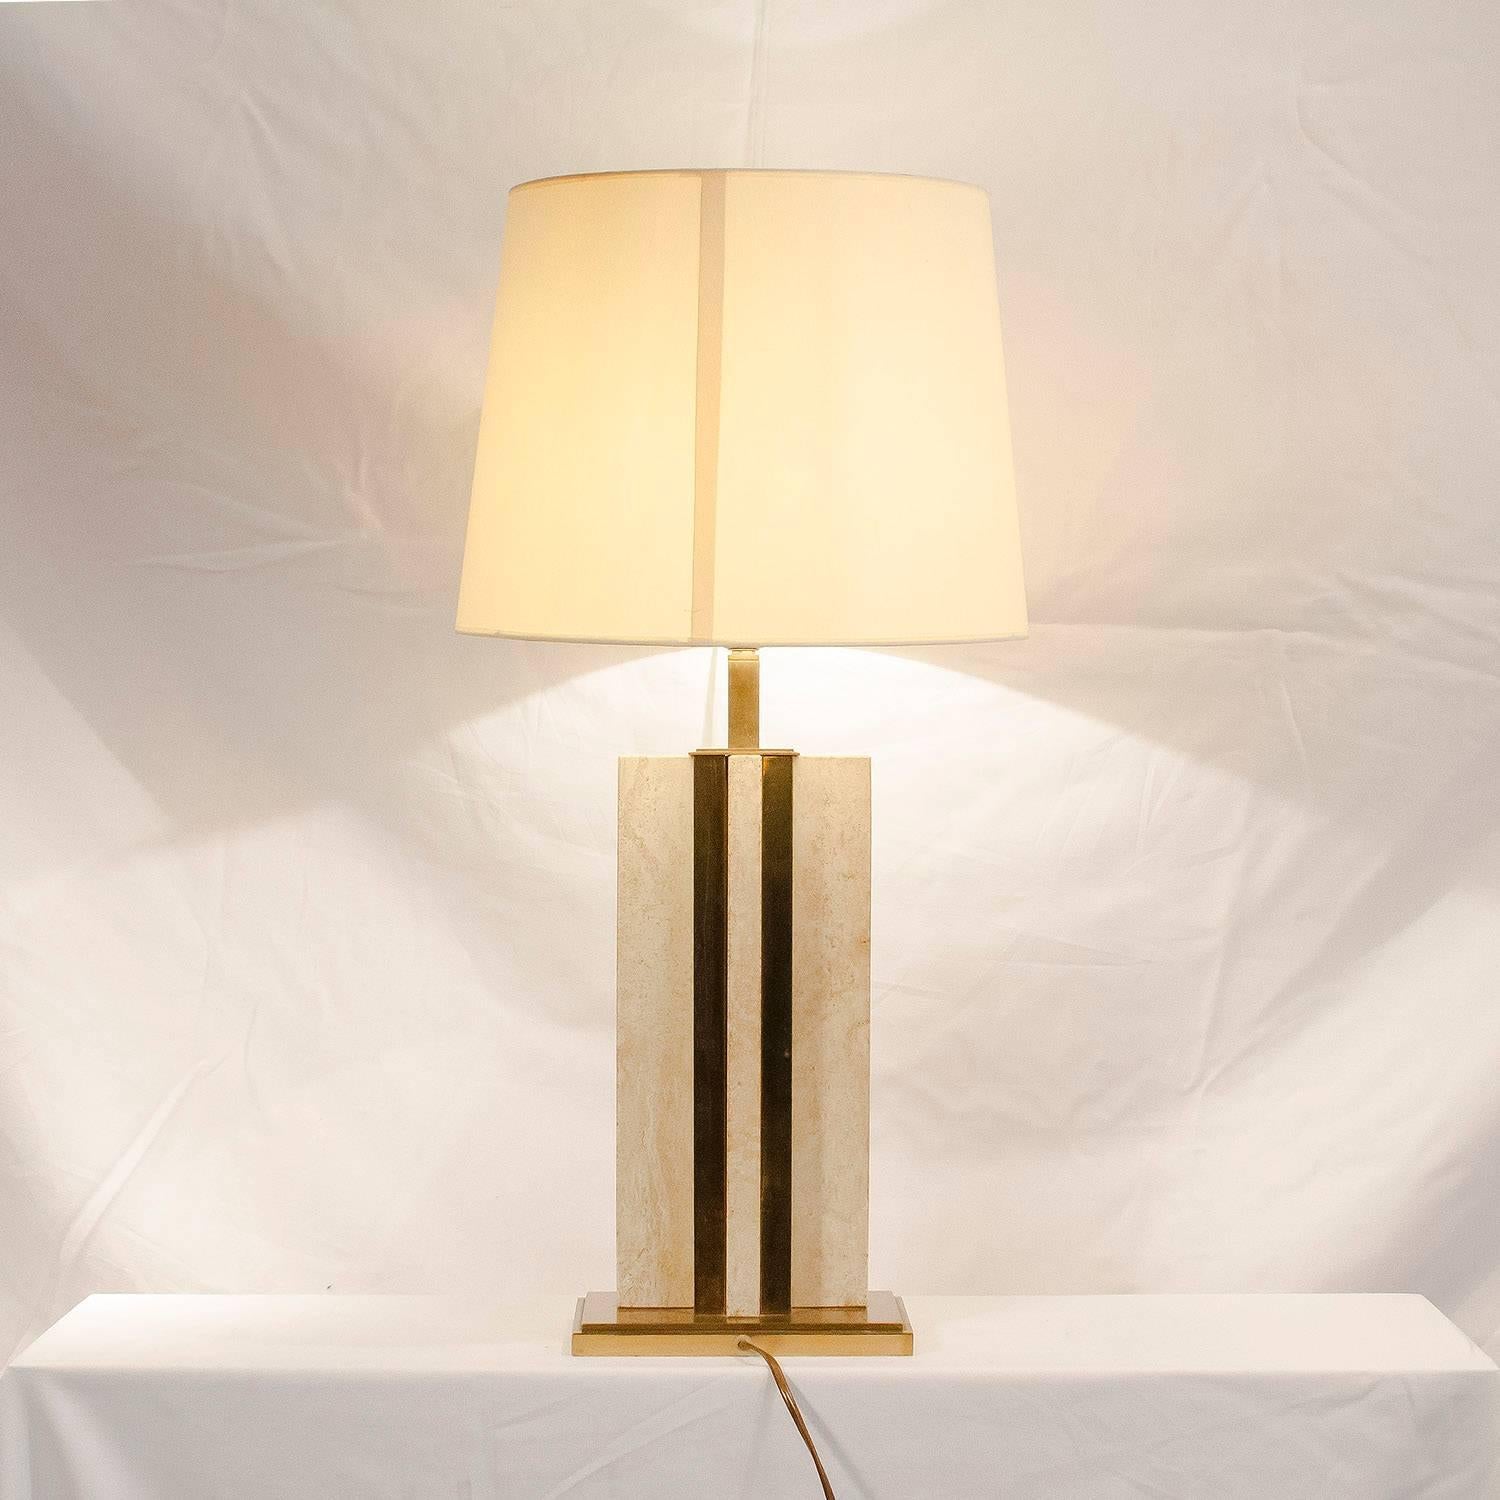 20th Century French Travertine and Brass Table Lamp, 1970s For Sale